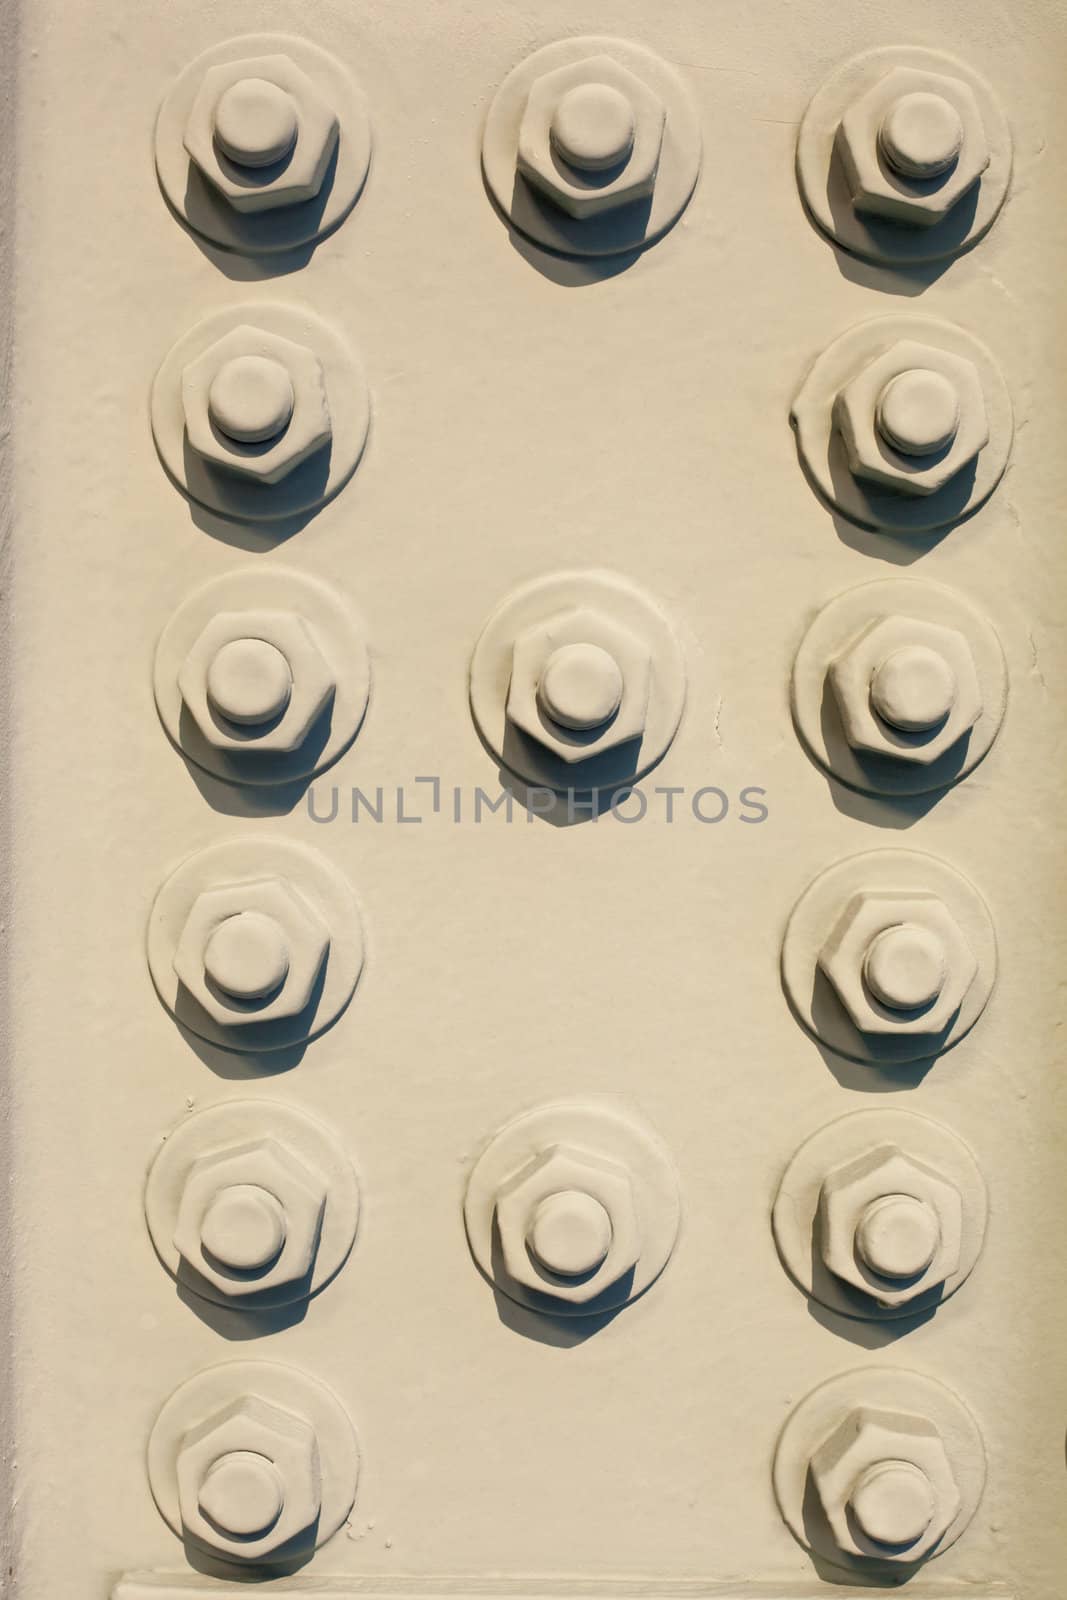 bolted steel background pattern by PiLens